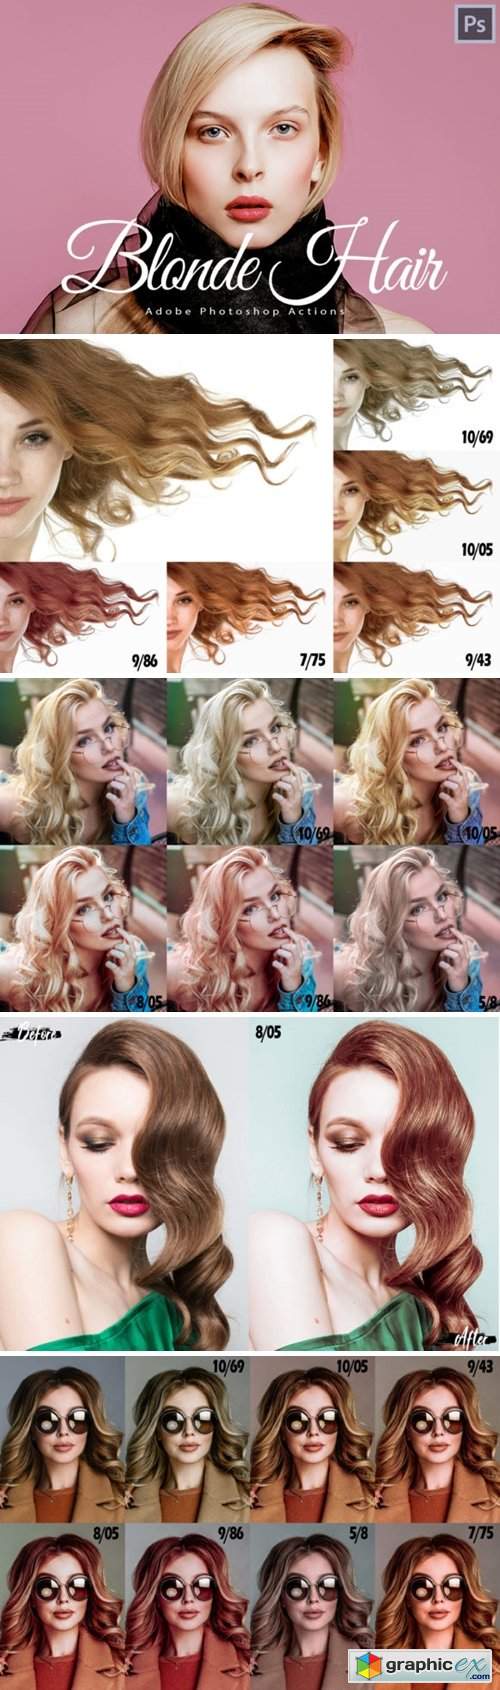 14 Blonde Hair Photoshop Actions